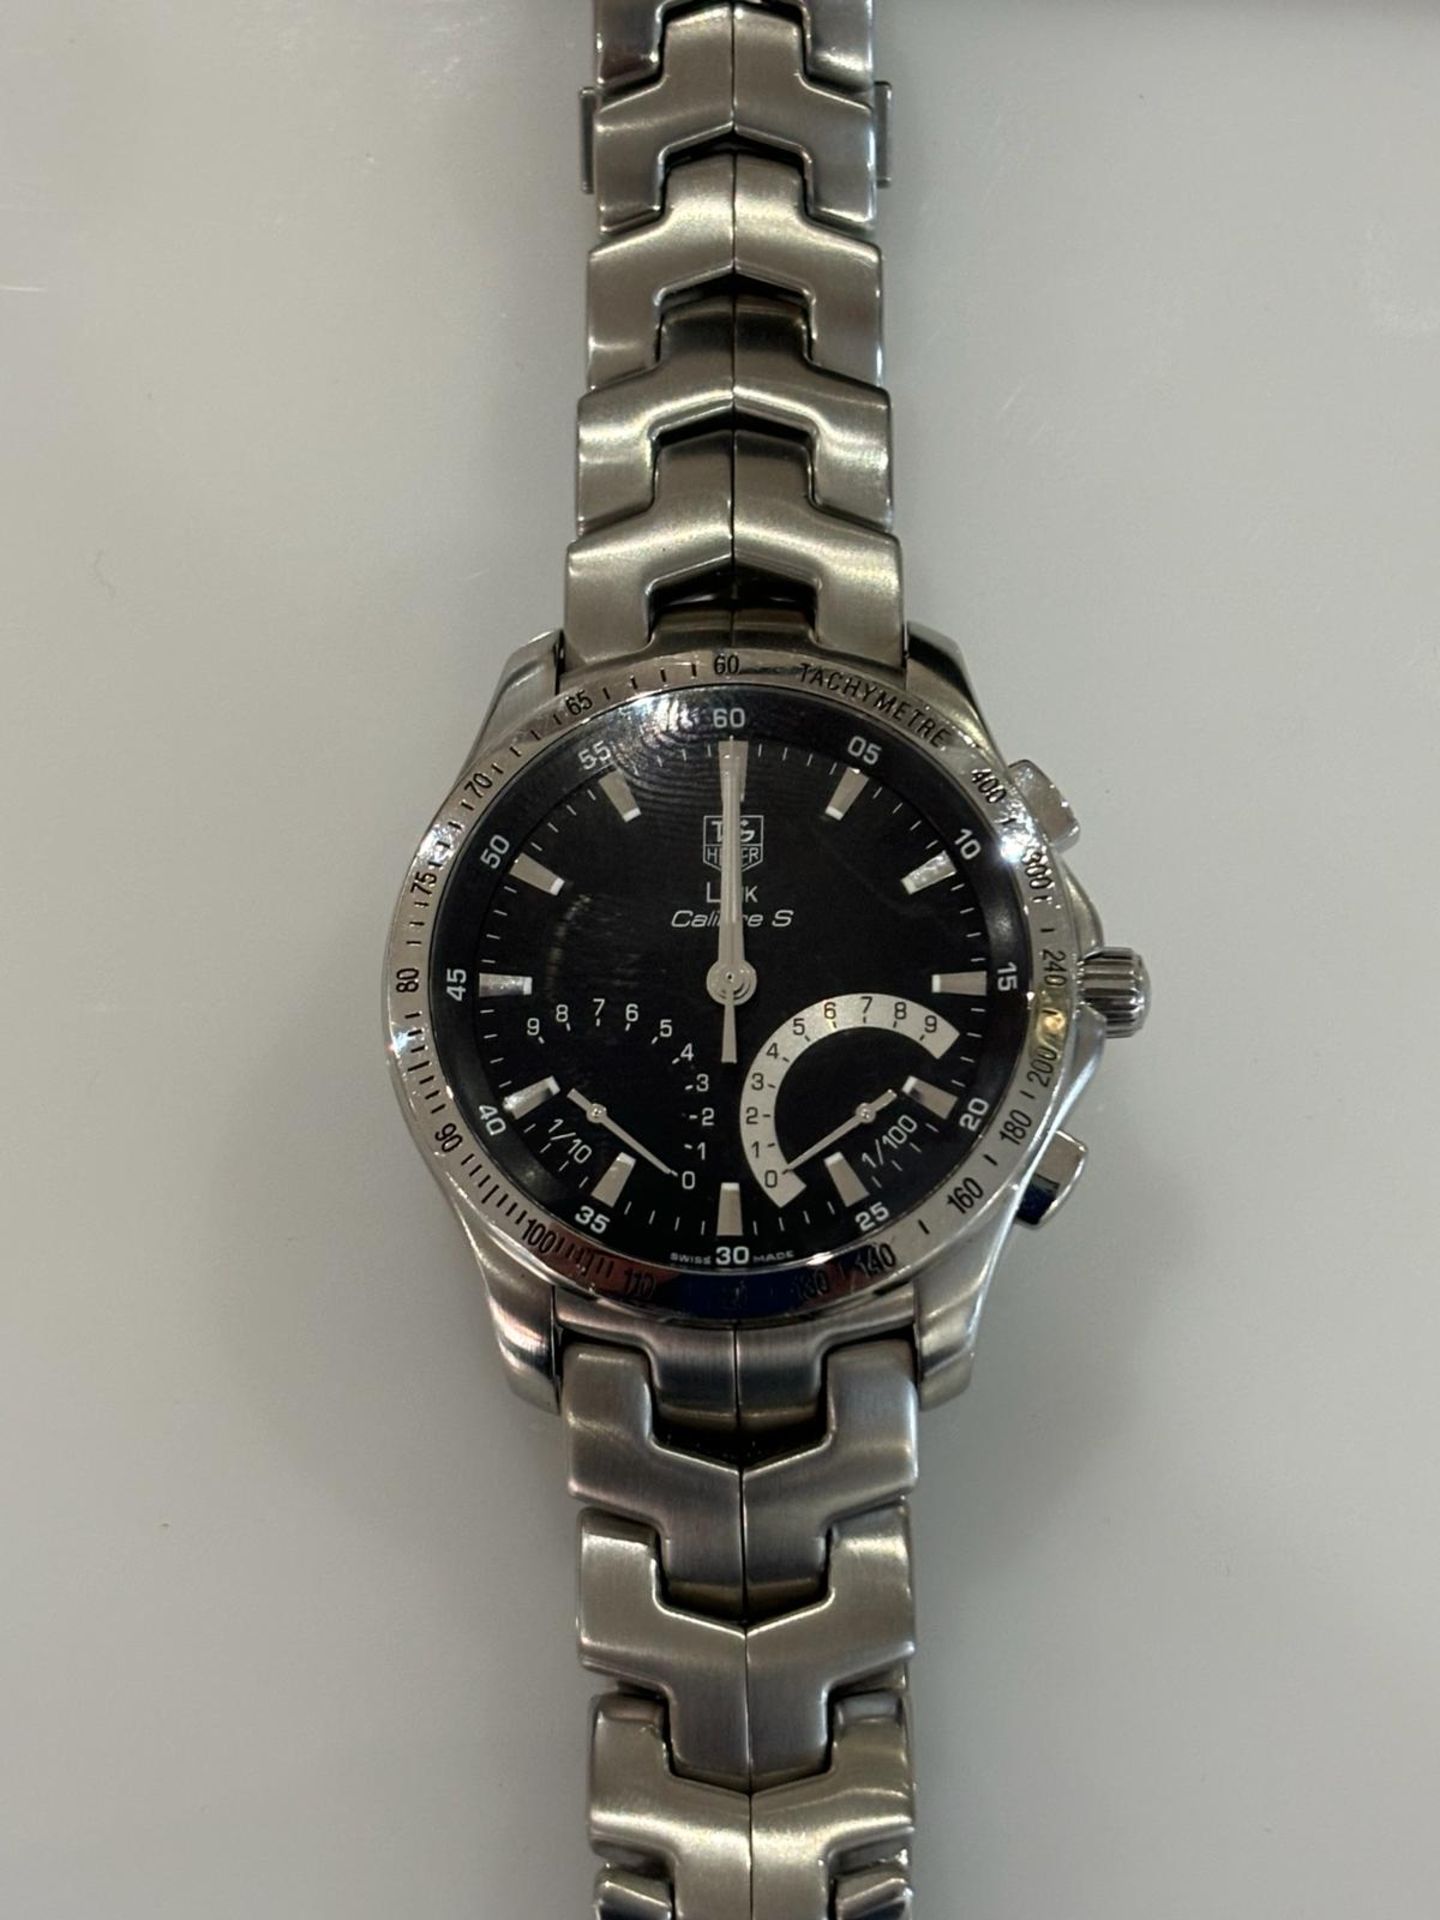 Tag Heuer - Stainless Steel Link Calibre S Quartz Chronograph Bracelet Watch - Image 2 of 6